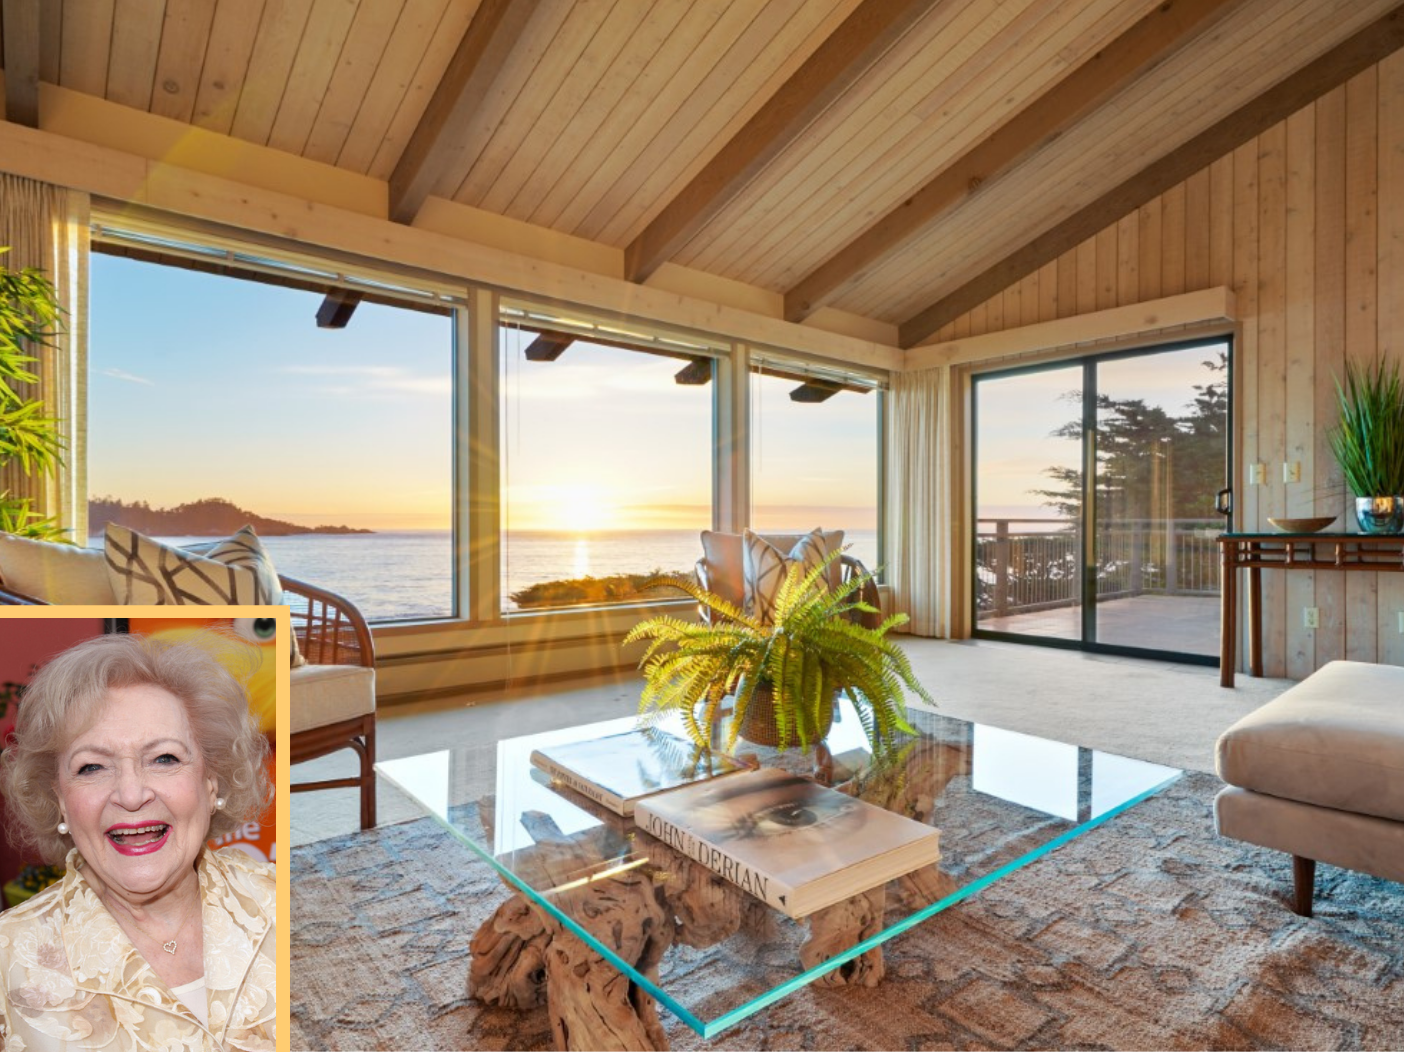 The Most Interesting Design Elements Of Betty White’s Carmel-by-the-Sea Home